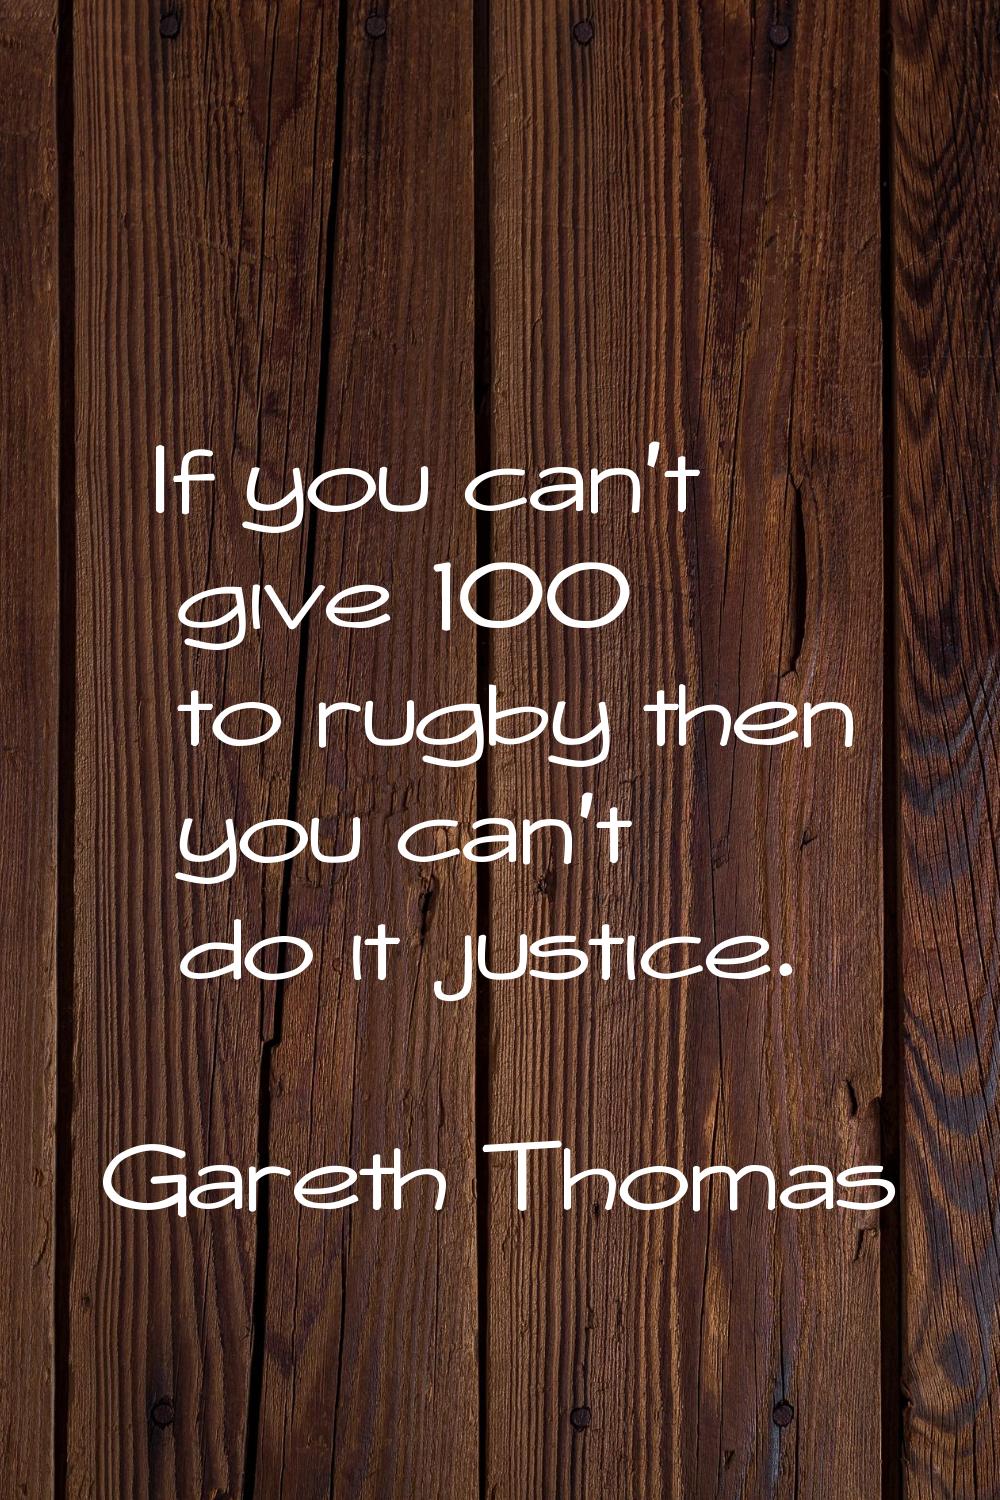 If you can't give 100% to rugby then you can't do it justice.